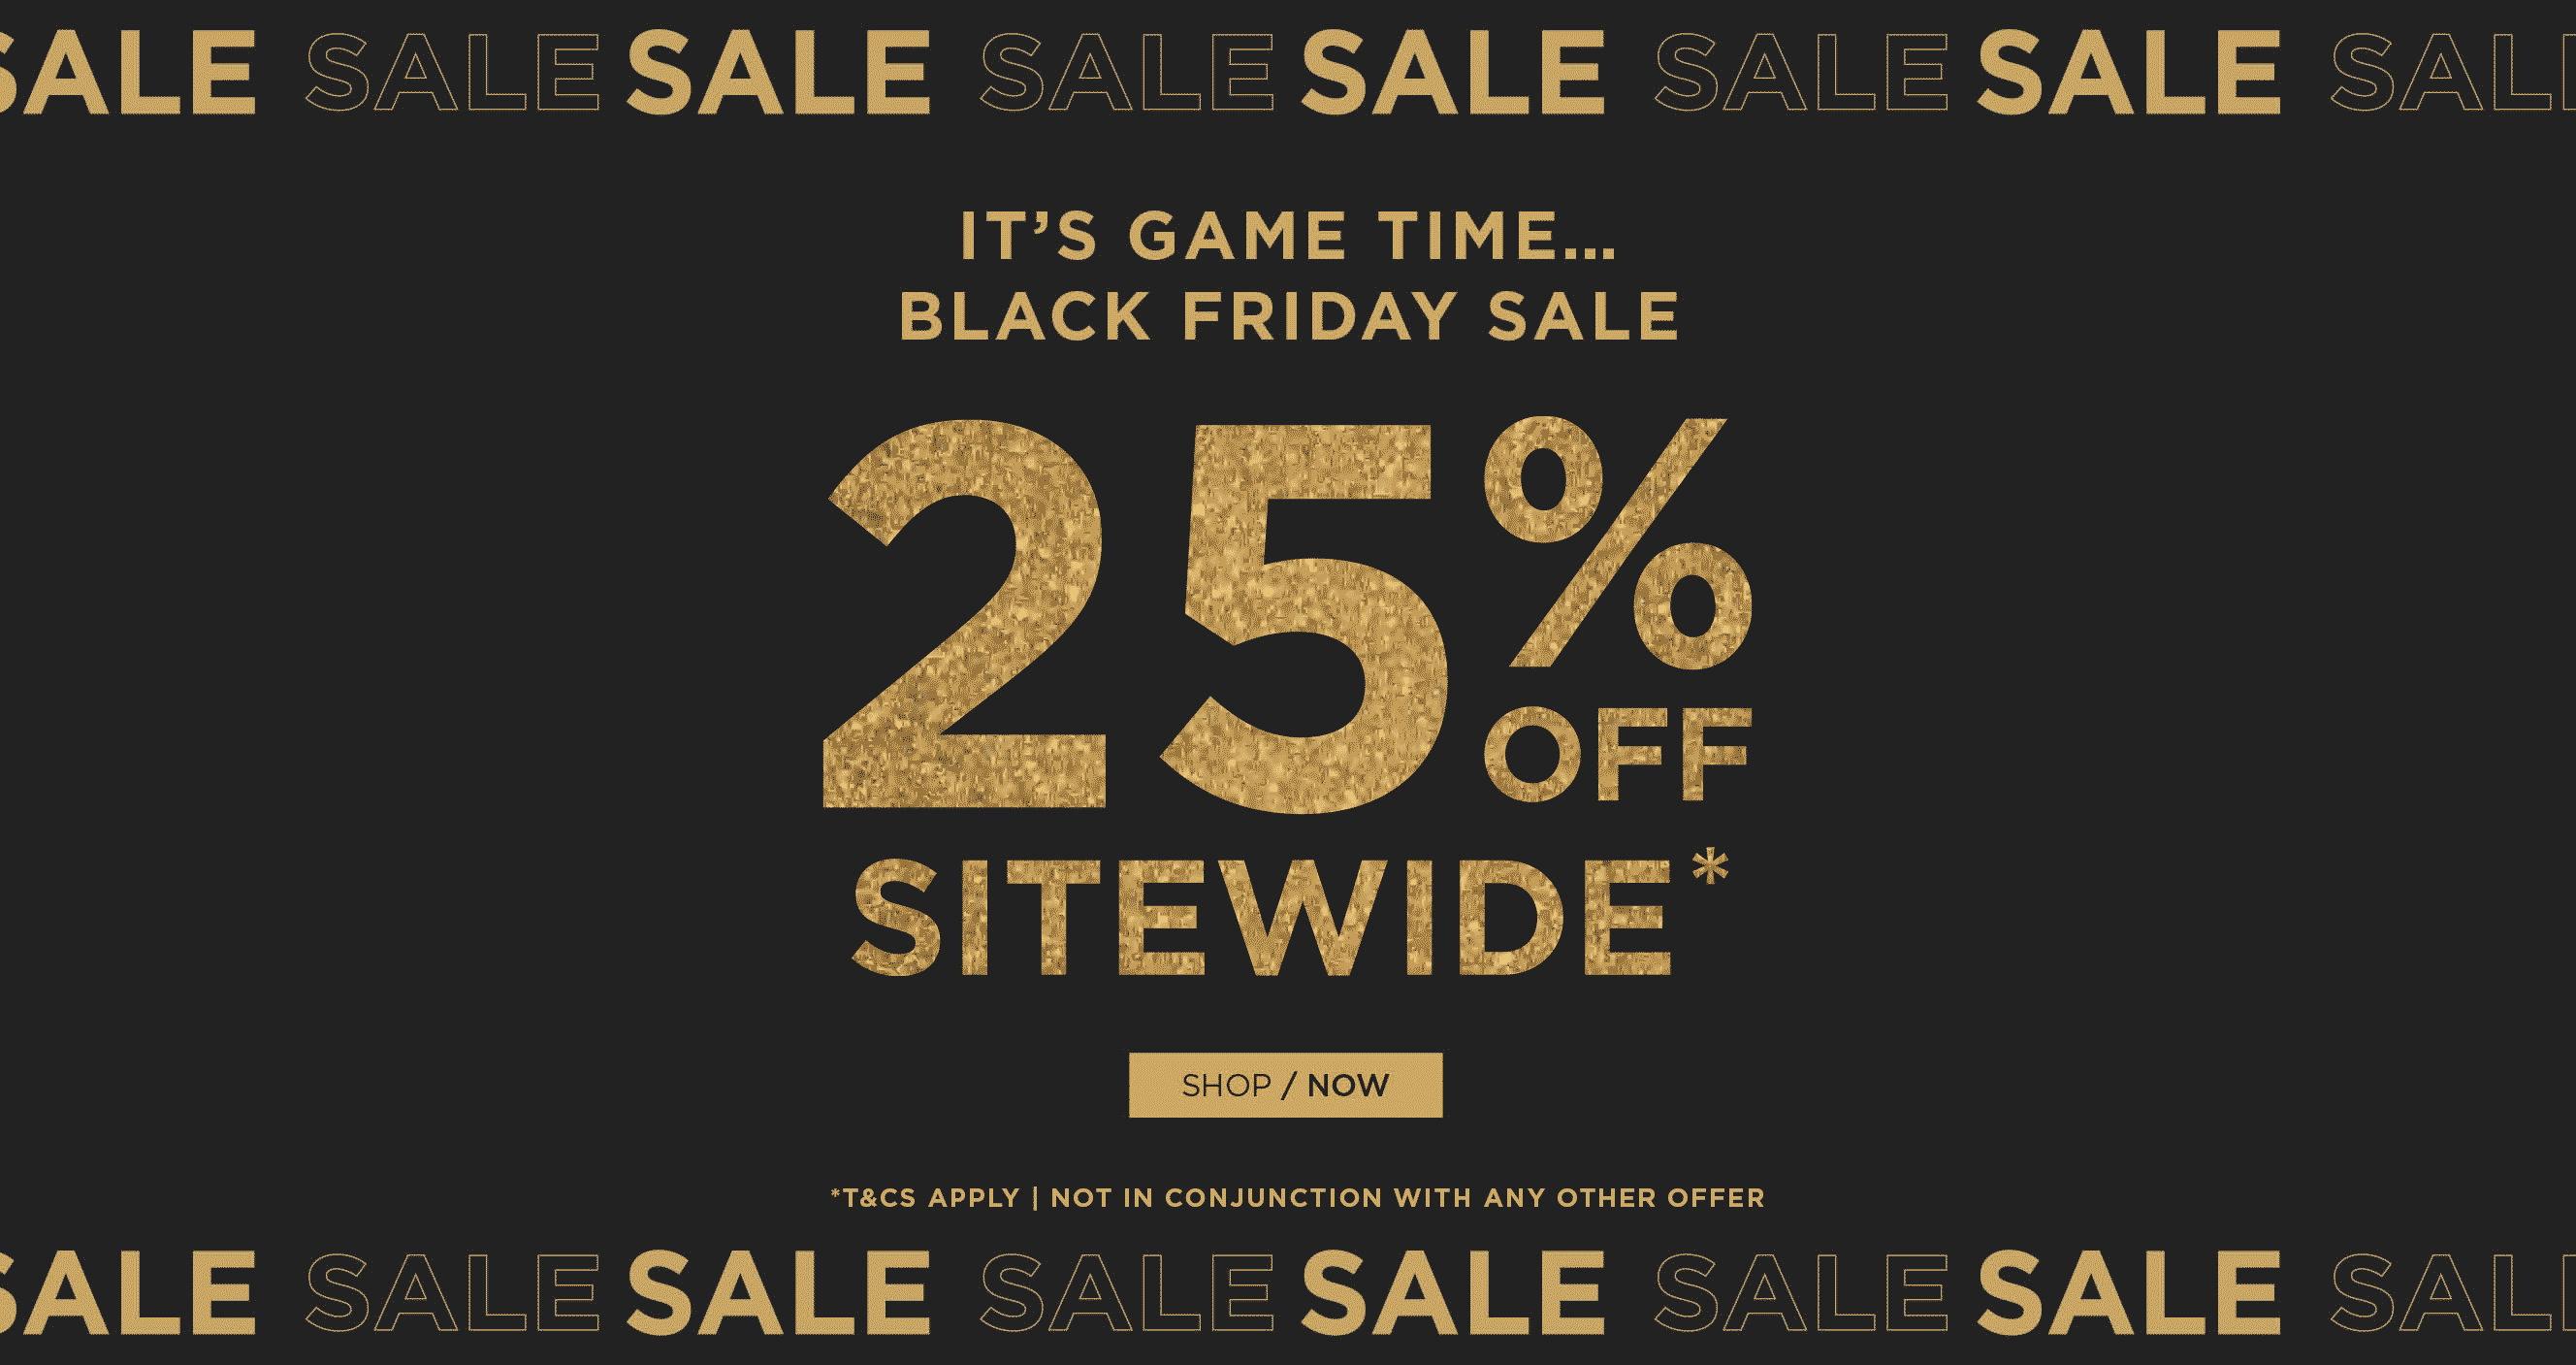 Lorna Jane Black Friday sale 25% OFF sitewide including tanks, tights, shoes & more